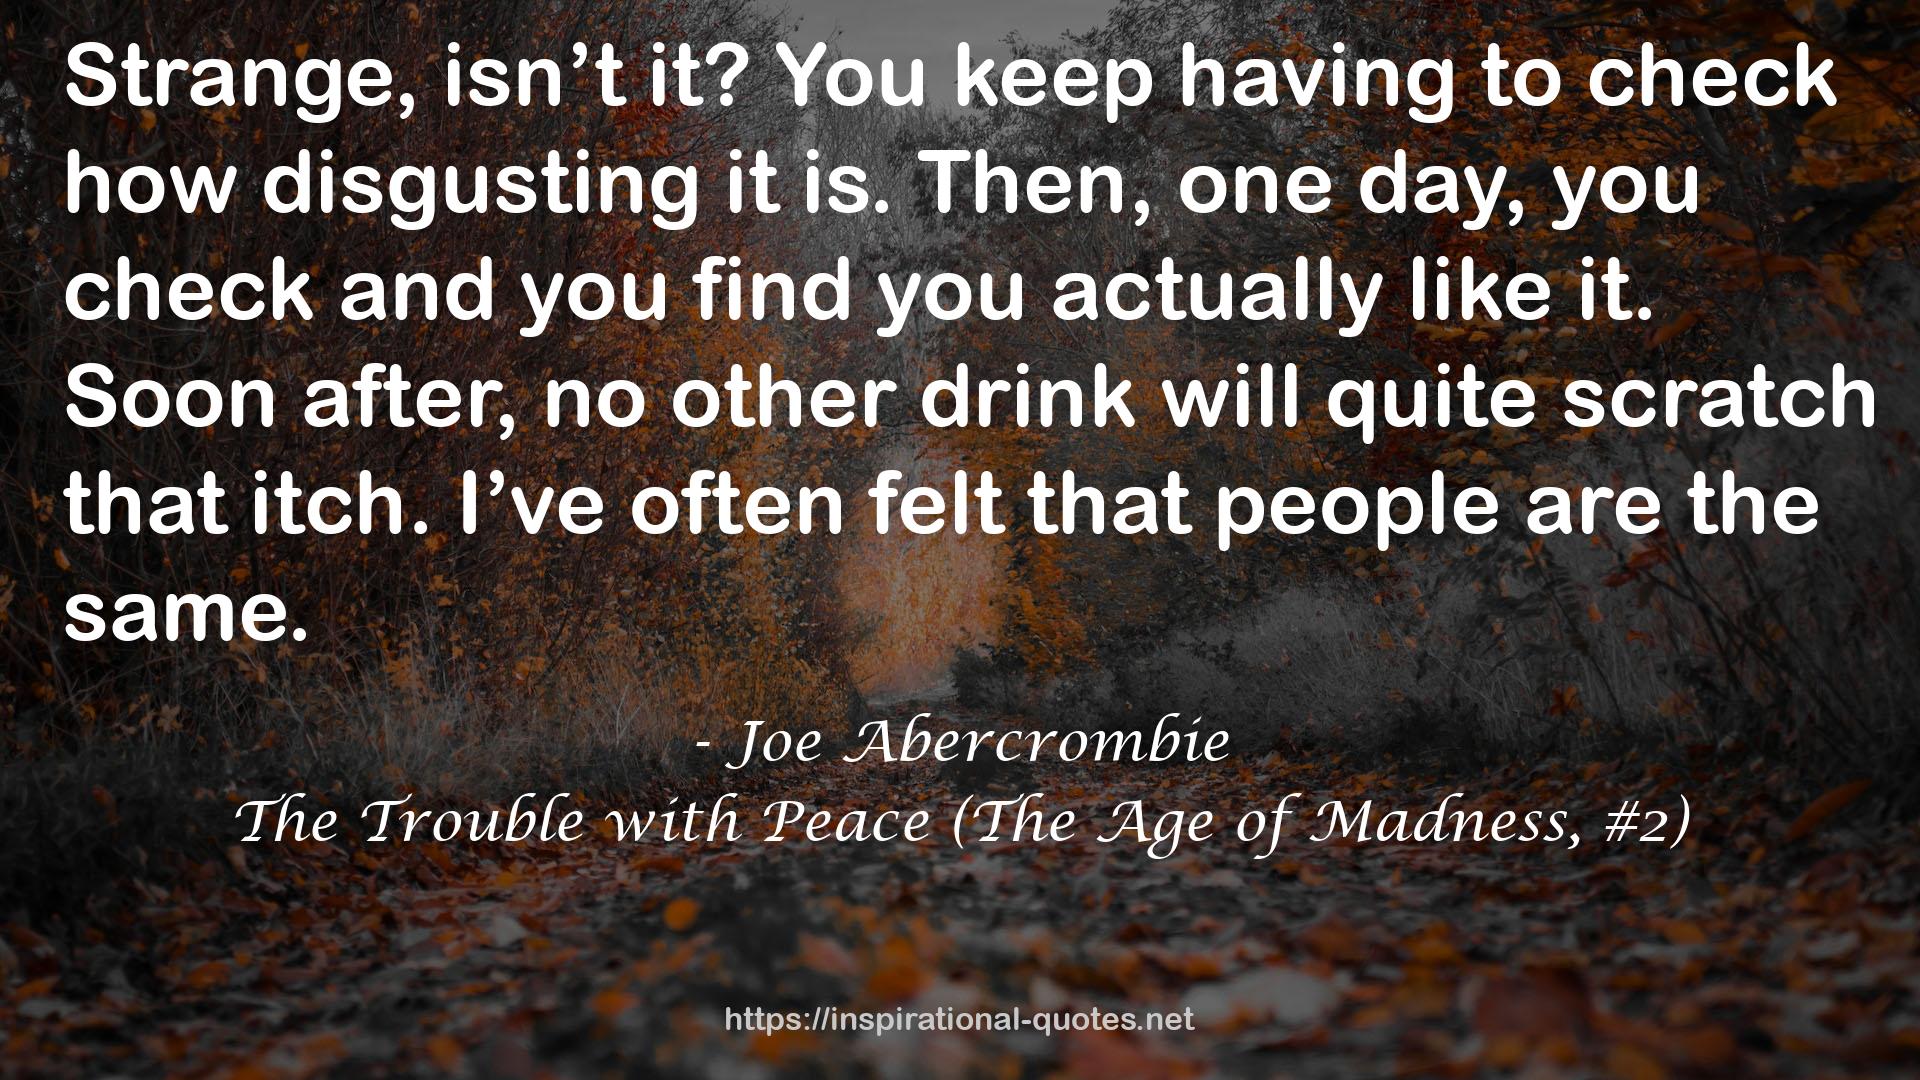 The Trouble with Peace (The Age of Madness, #2) QUOTES